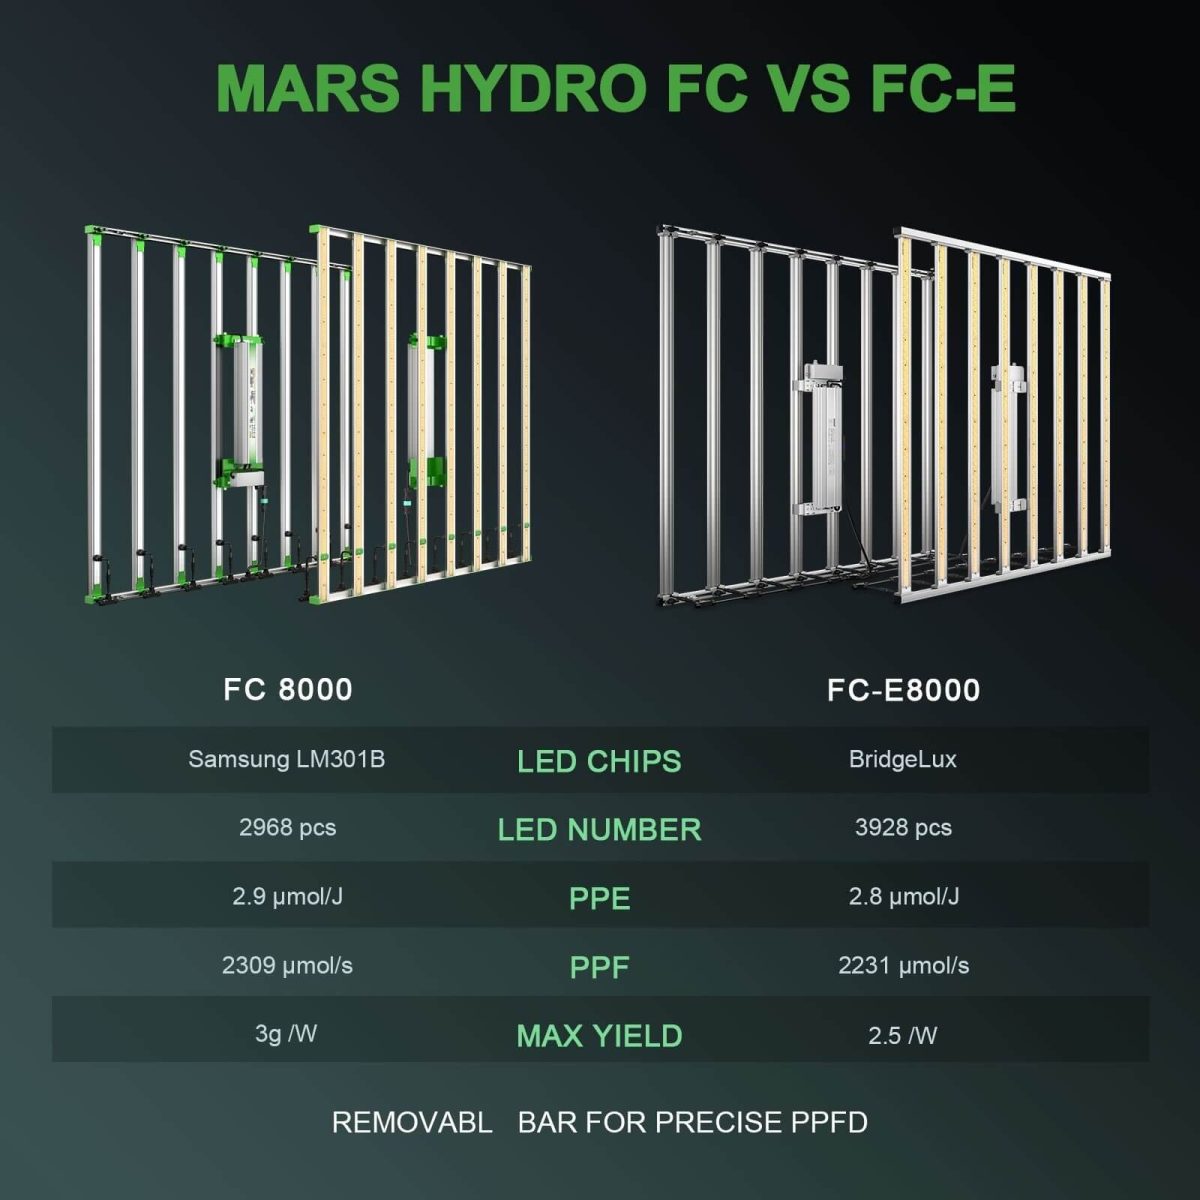 Mars Hydro FC vs FC-E differ in diode brand, LED quantity, PPE, PPF, and max yield.